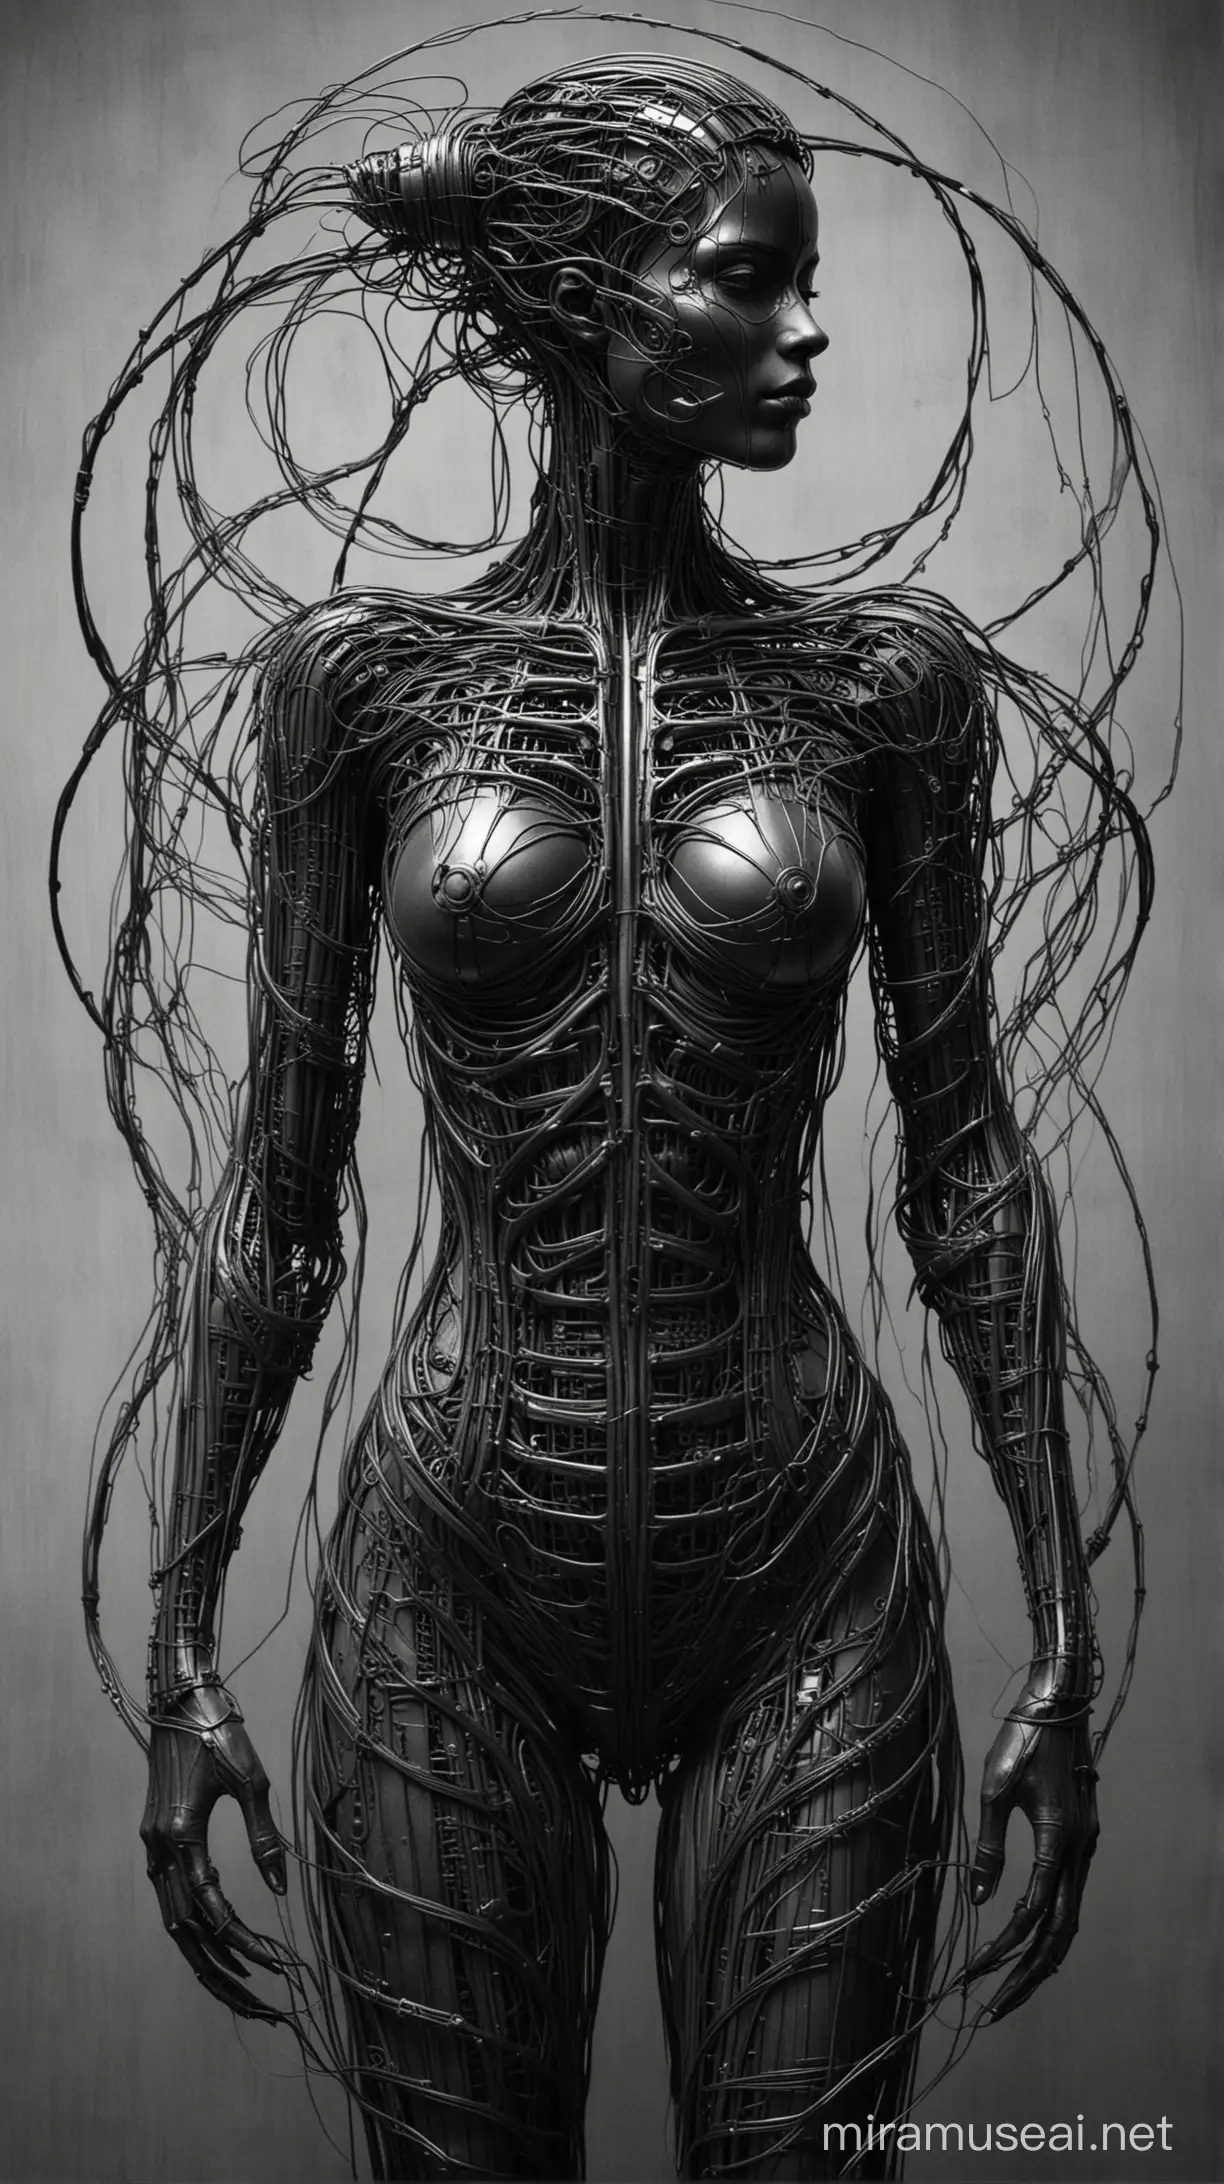 Giger Style Silhouette Intricately Woven Woman Formed from Intertwined Wires